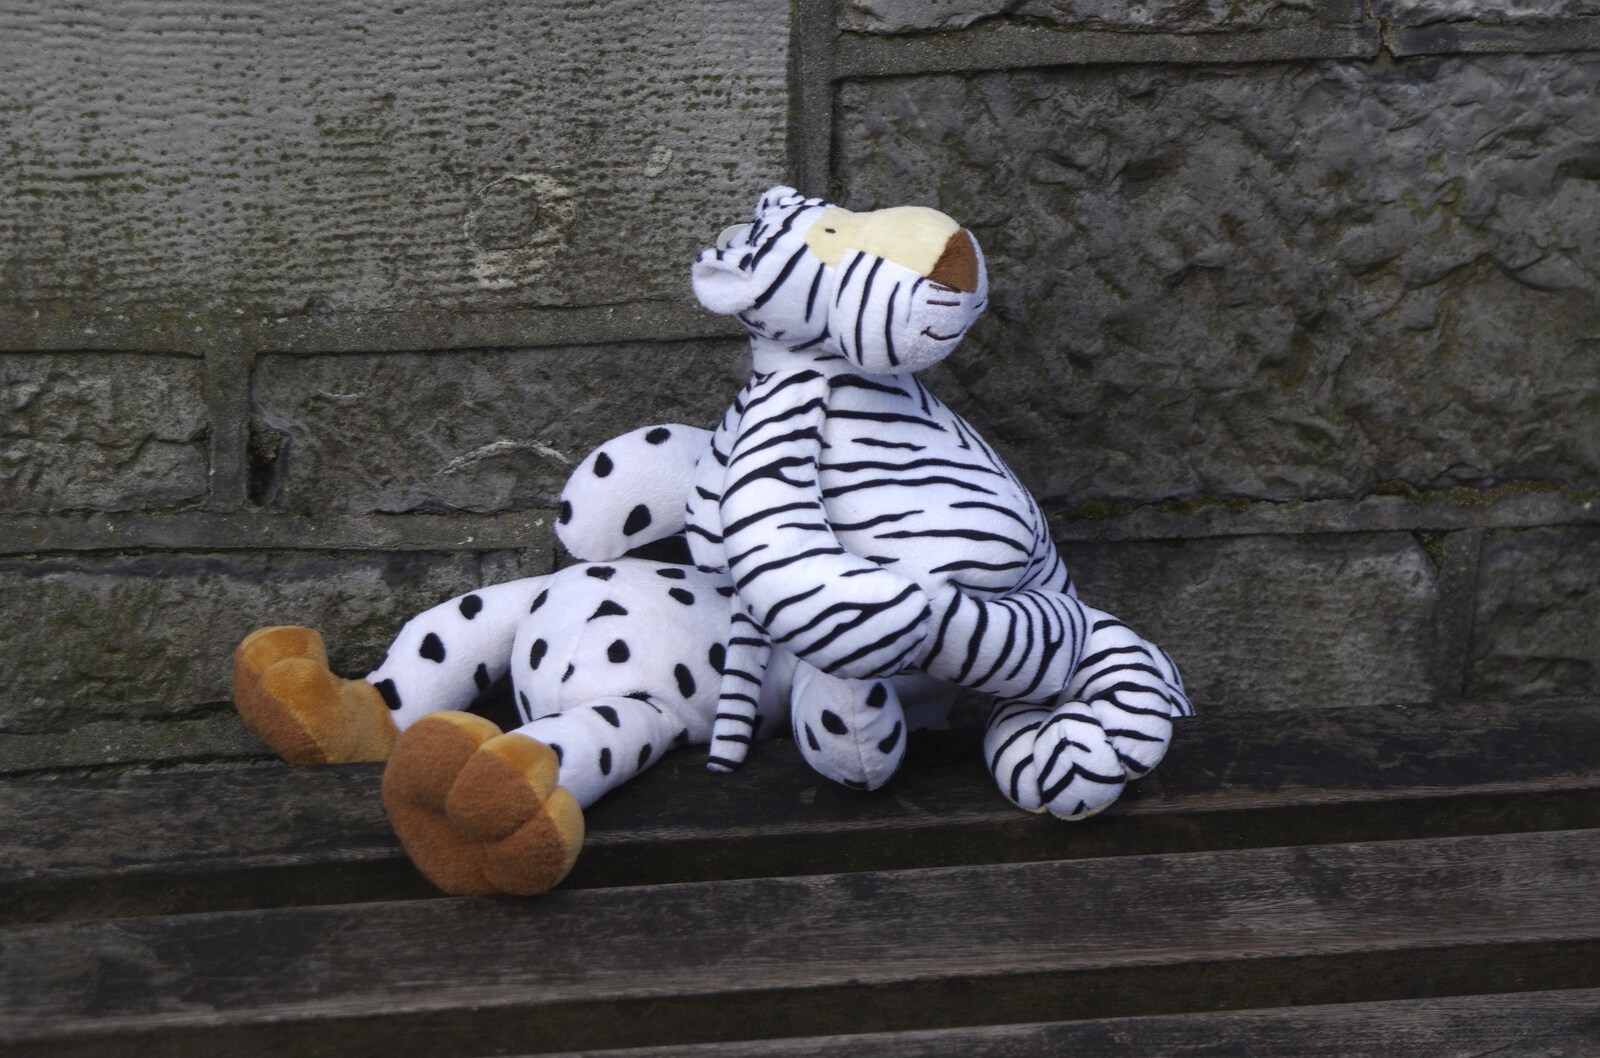 Kilkee to Galway, Connacht, Ireland - 23rd September 2007: Sad: lost or abandoned stuffed animals on a bench